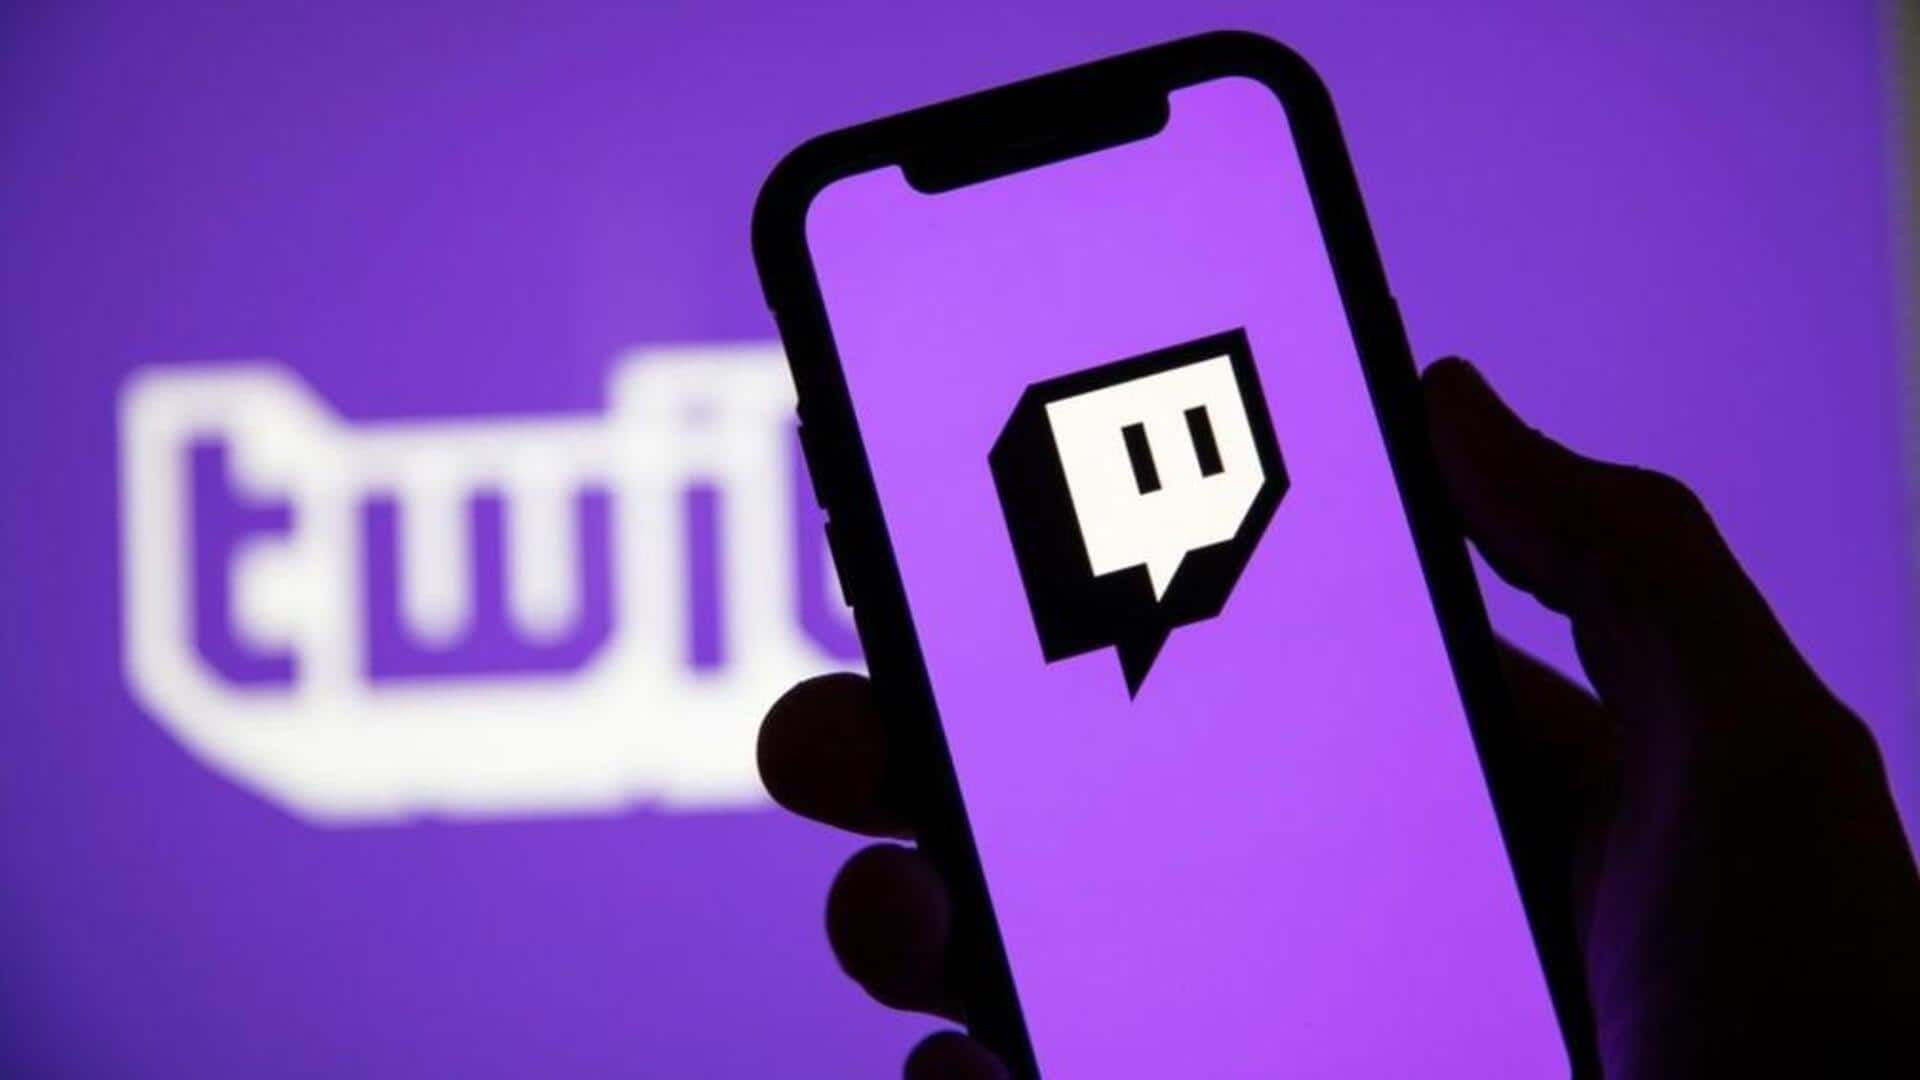 Amazon-owned Twitch to lay off 35% of workforce